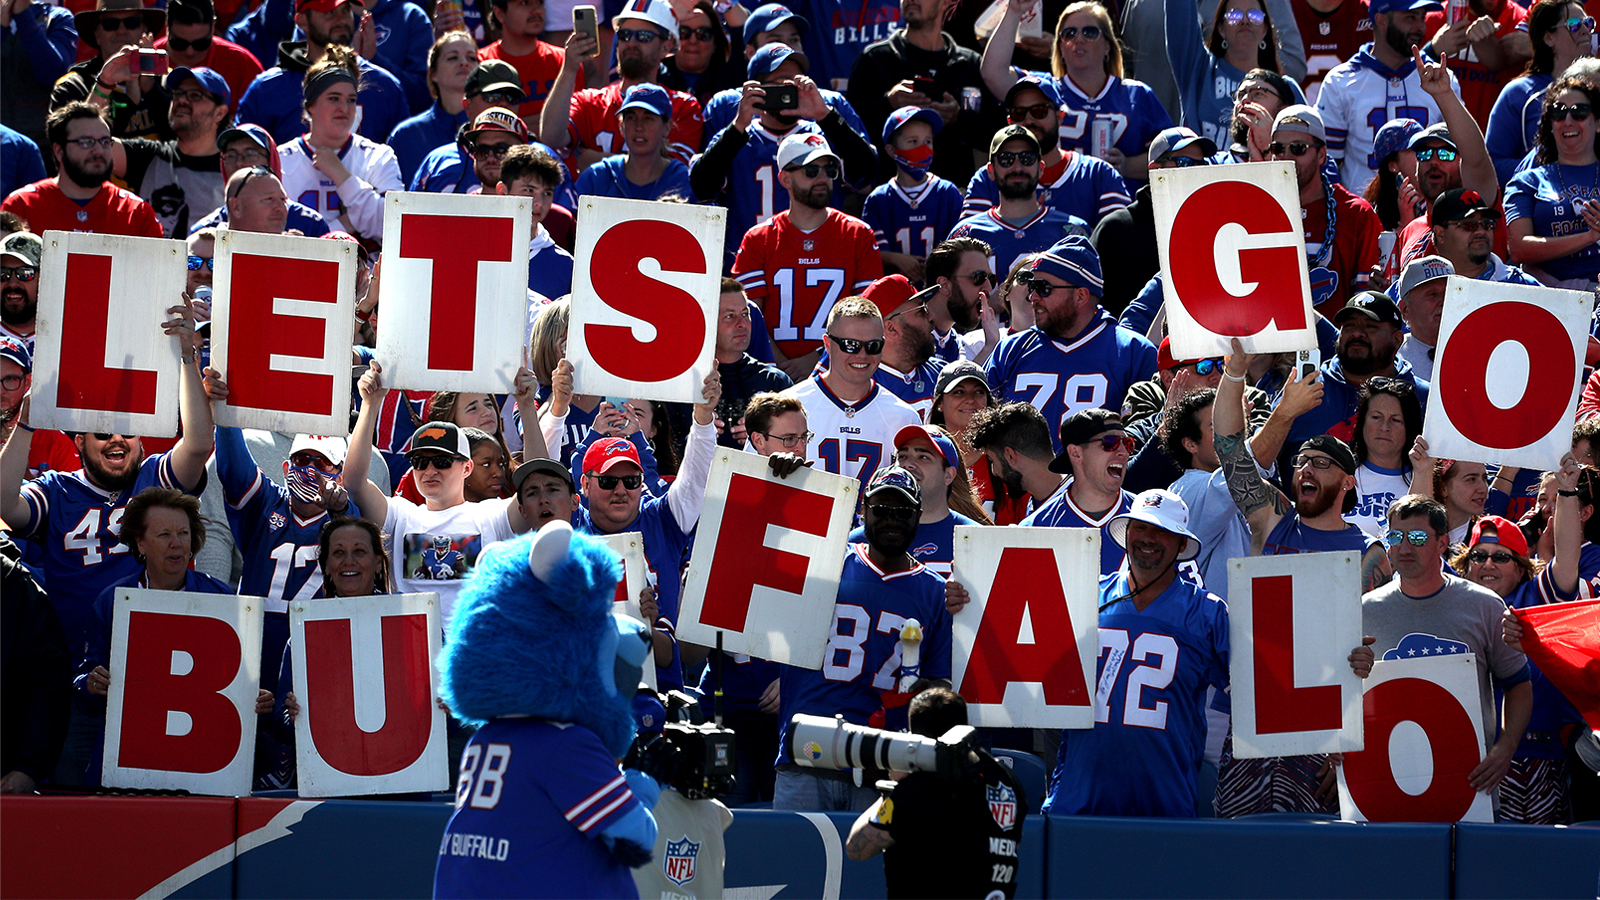 Bills fans with DIRECTV may be left in dark come Sunday